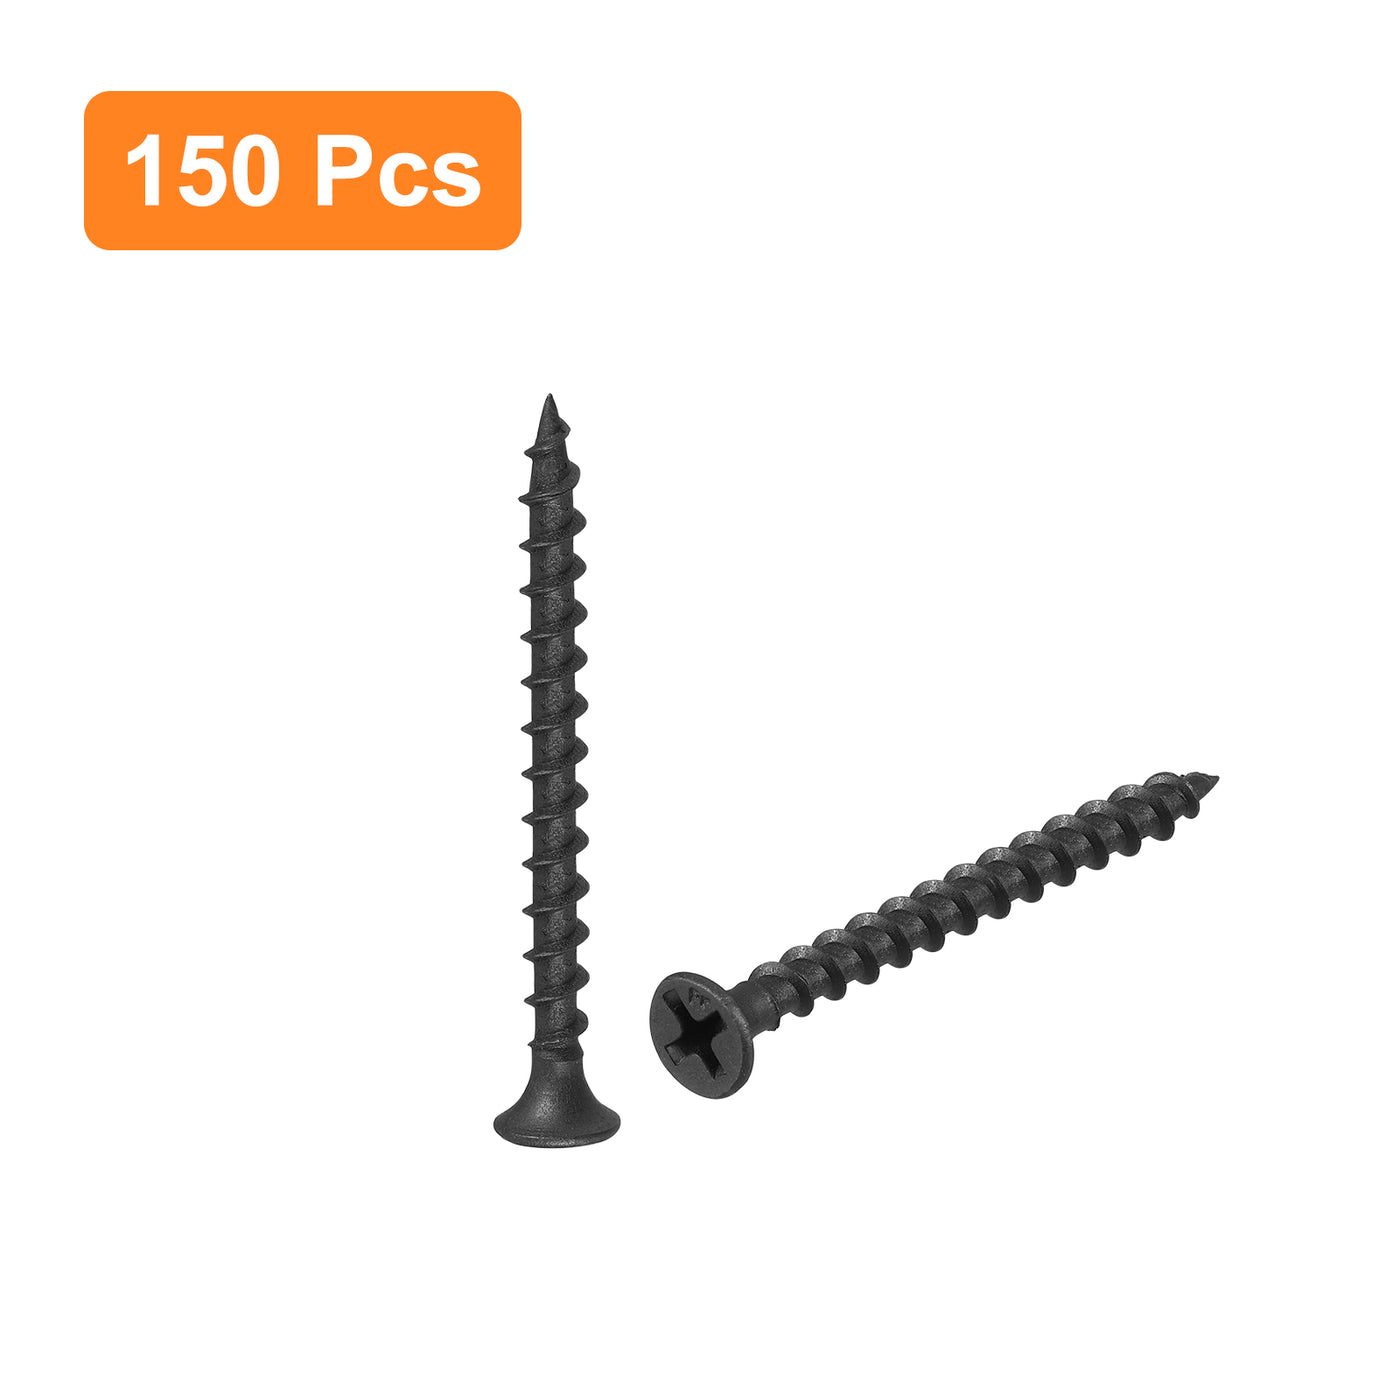 uxcell Uxcell M3.8x45mm 150pcs Phillips Drive Wood Screws, Carbon Steel Self Tapping Screws